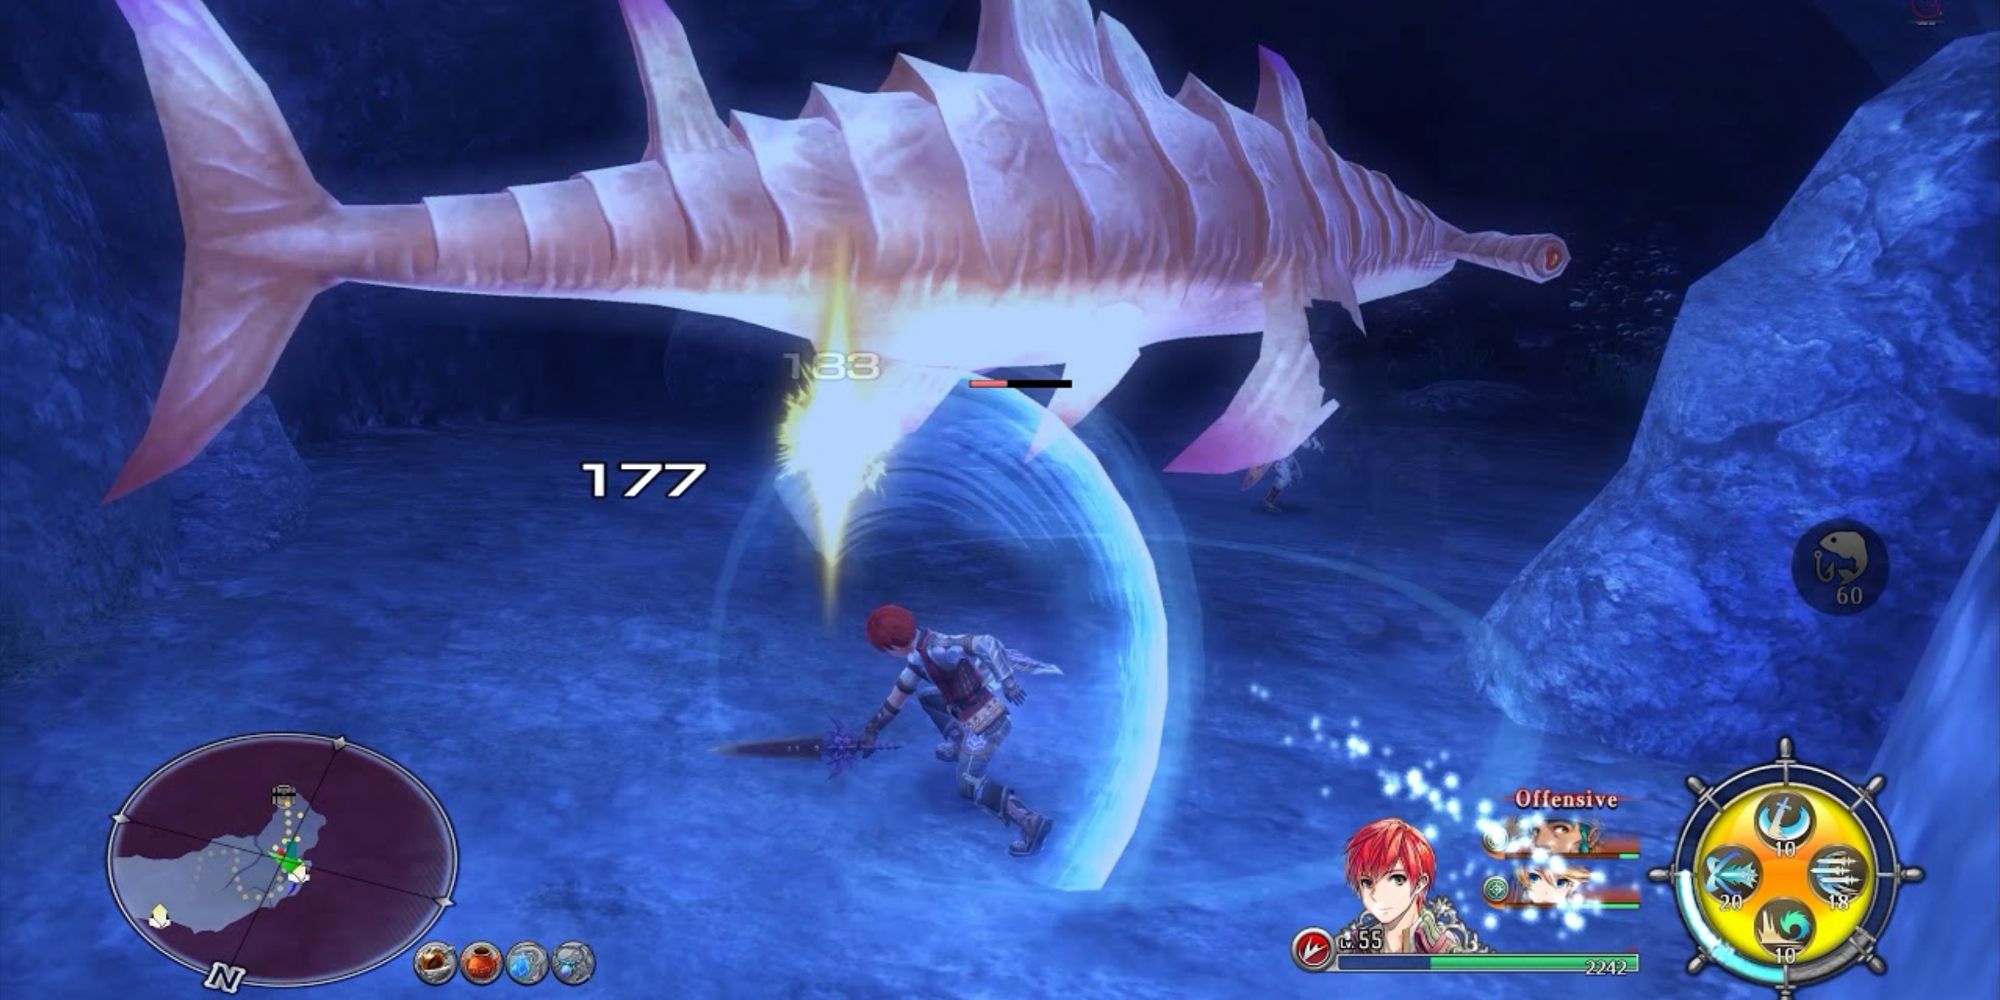 Fighting underwater with the Hermit's Scale Adventure Gear in Ys 8: Lacrimosa of Dana